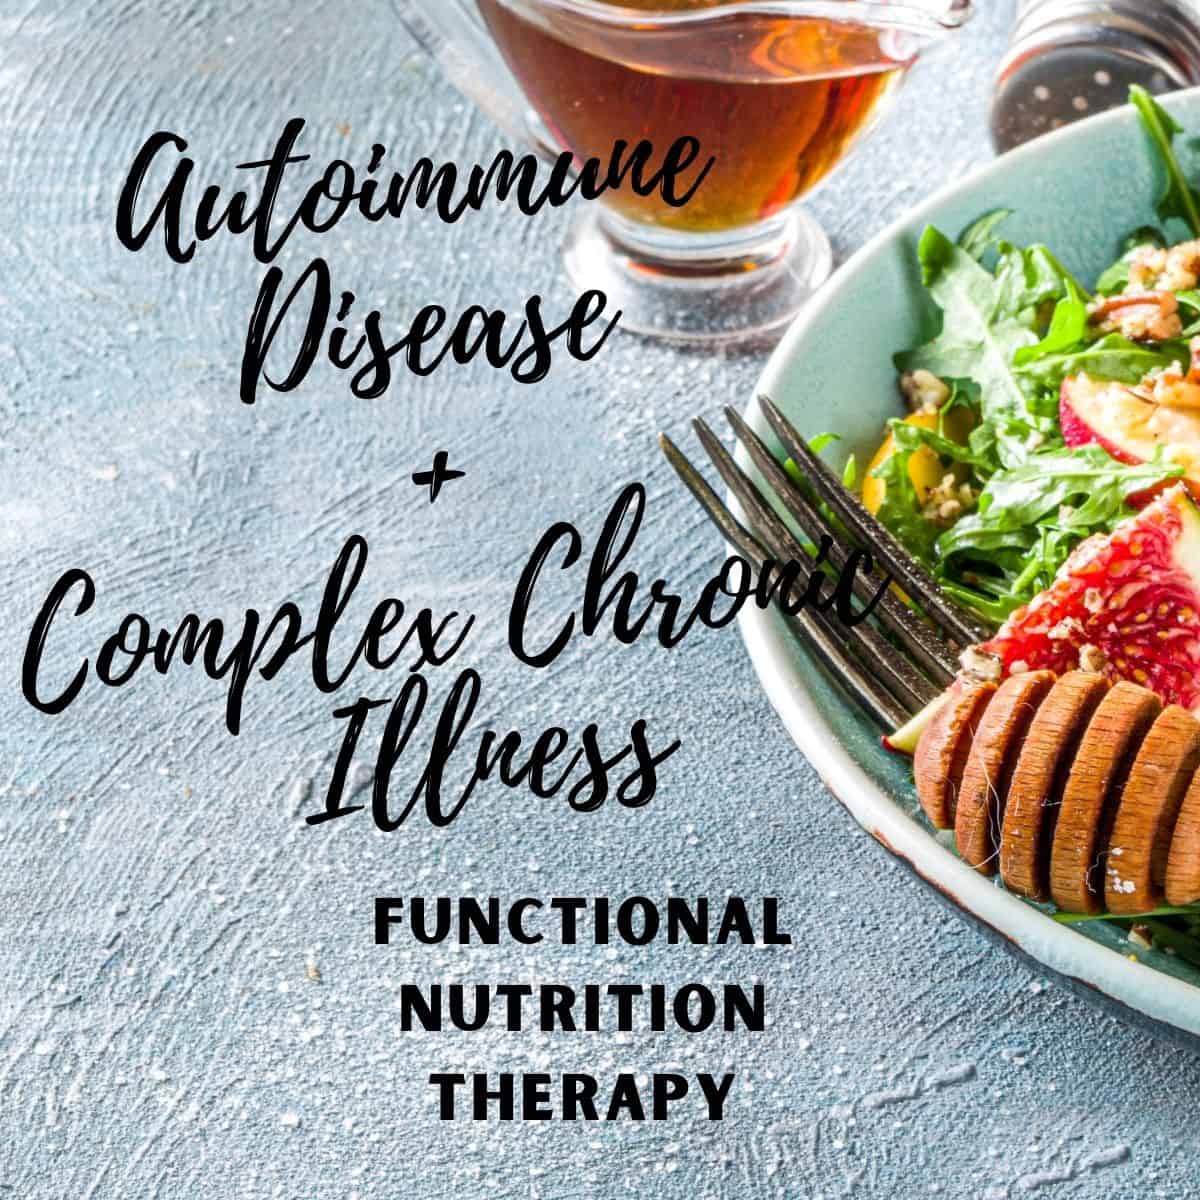 Functional Nutrition Therapy Services